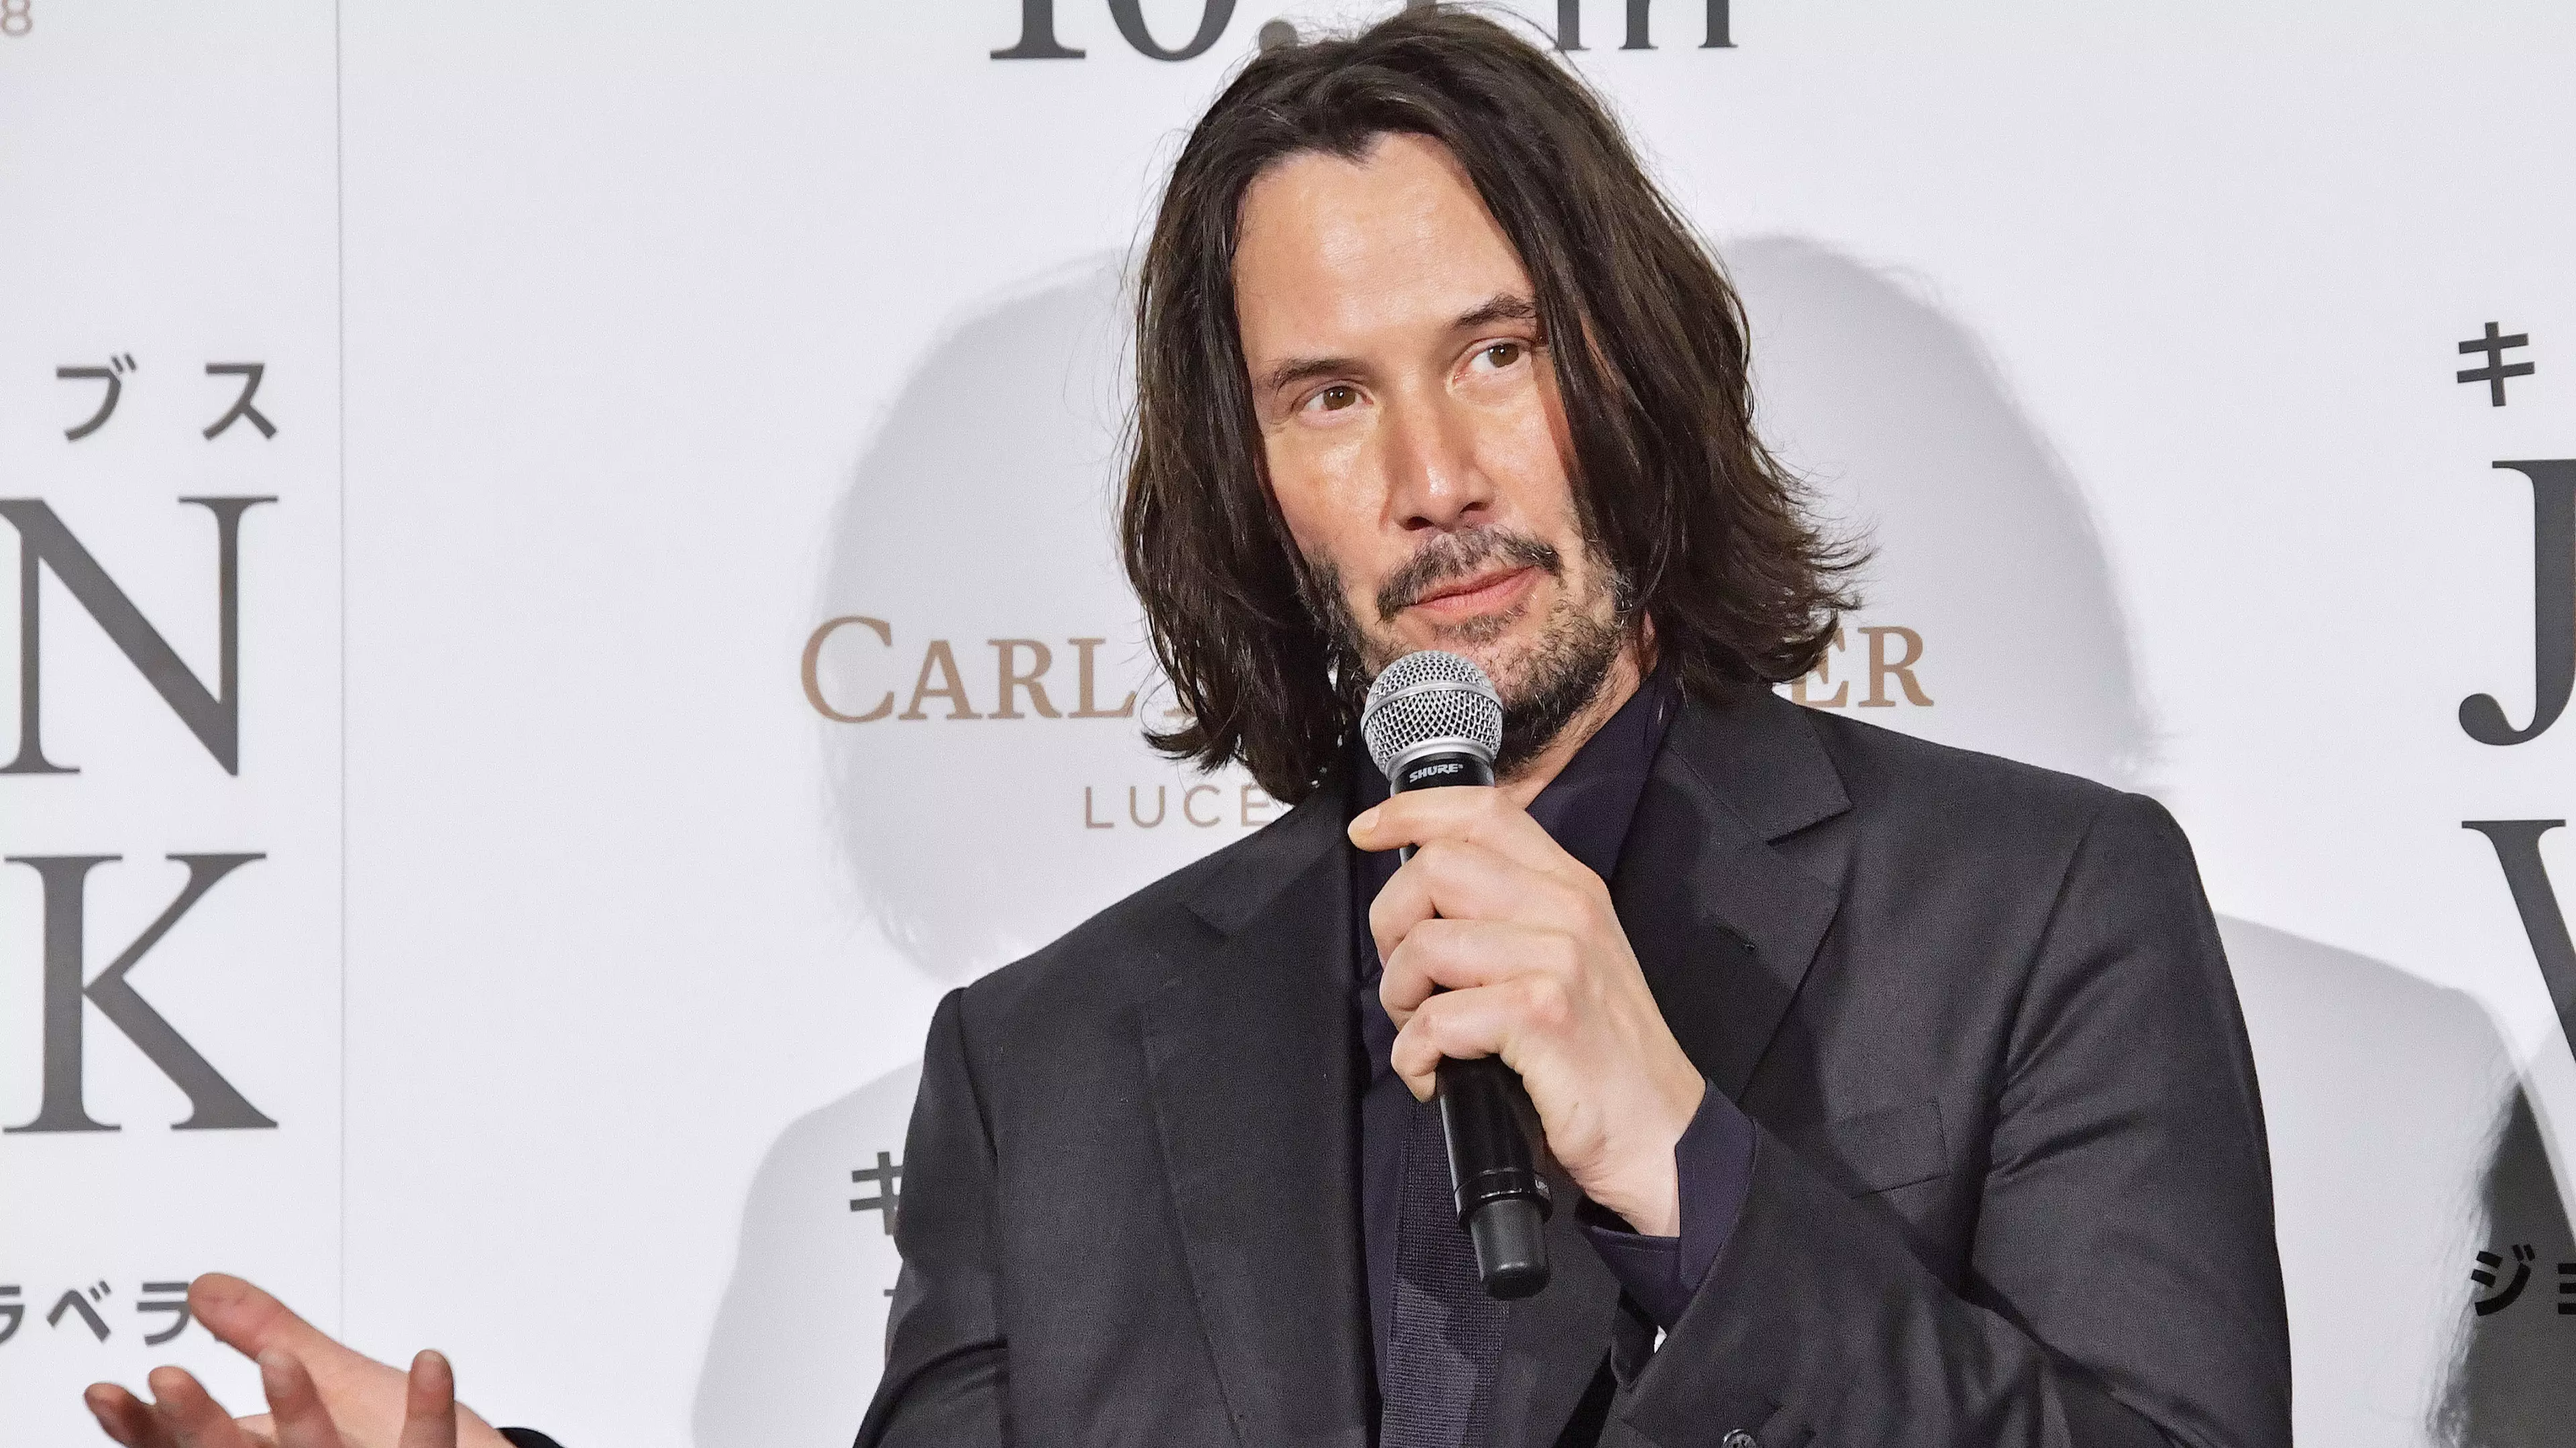 21 May 2021 Is Being Hailed As Keanu Reeves Day And People Want It To Be National Holiday